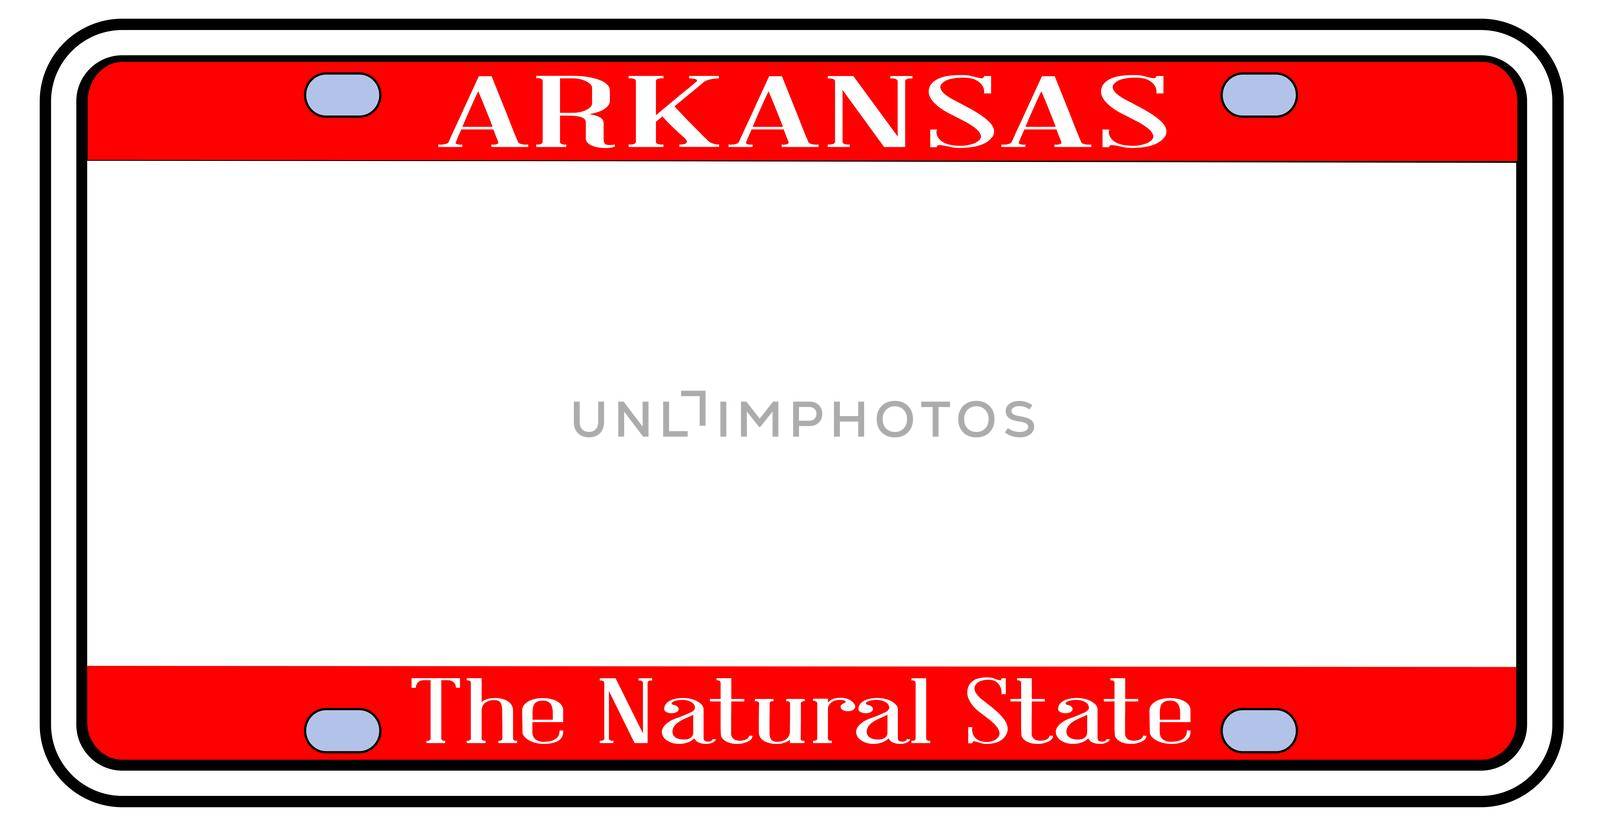 Arkansas state license plate in the colors of the state flag over a white background